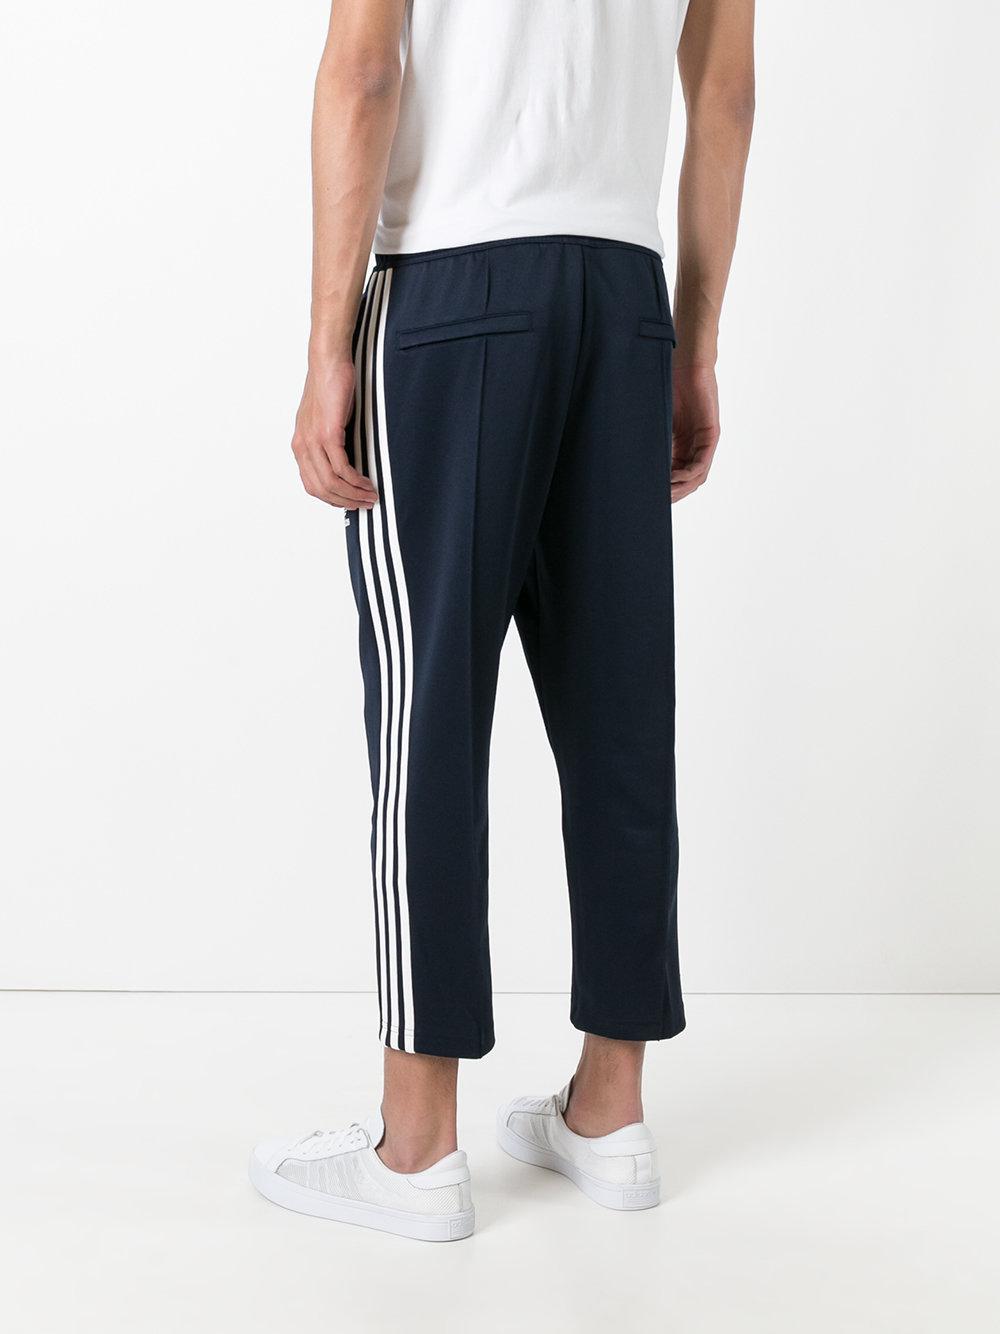 adidas Originals Cotton Cropped Track Pants in Blue for Men - Lyst